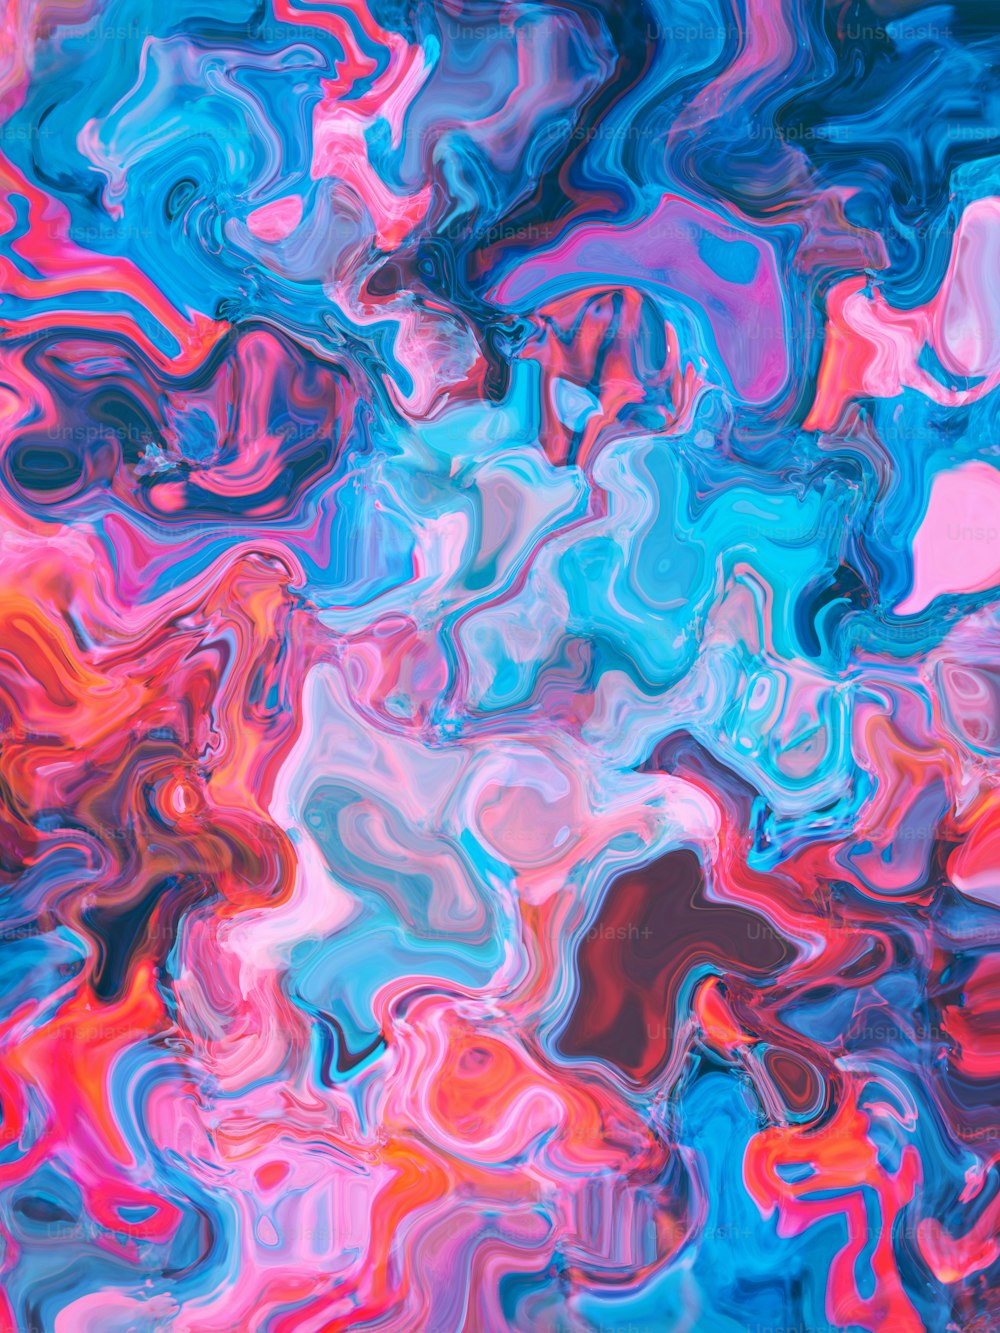 an abstract painting with blue, pink, and red colors